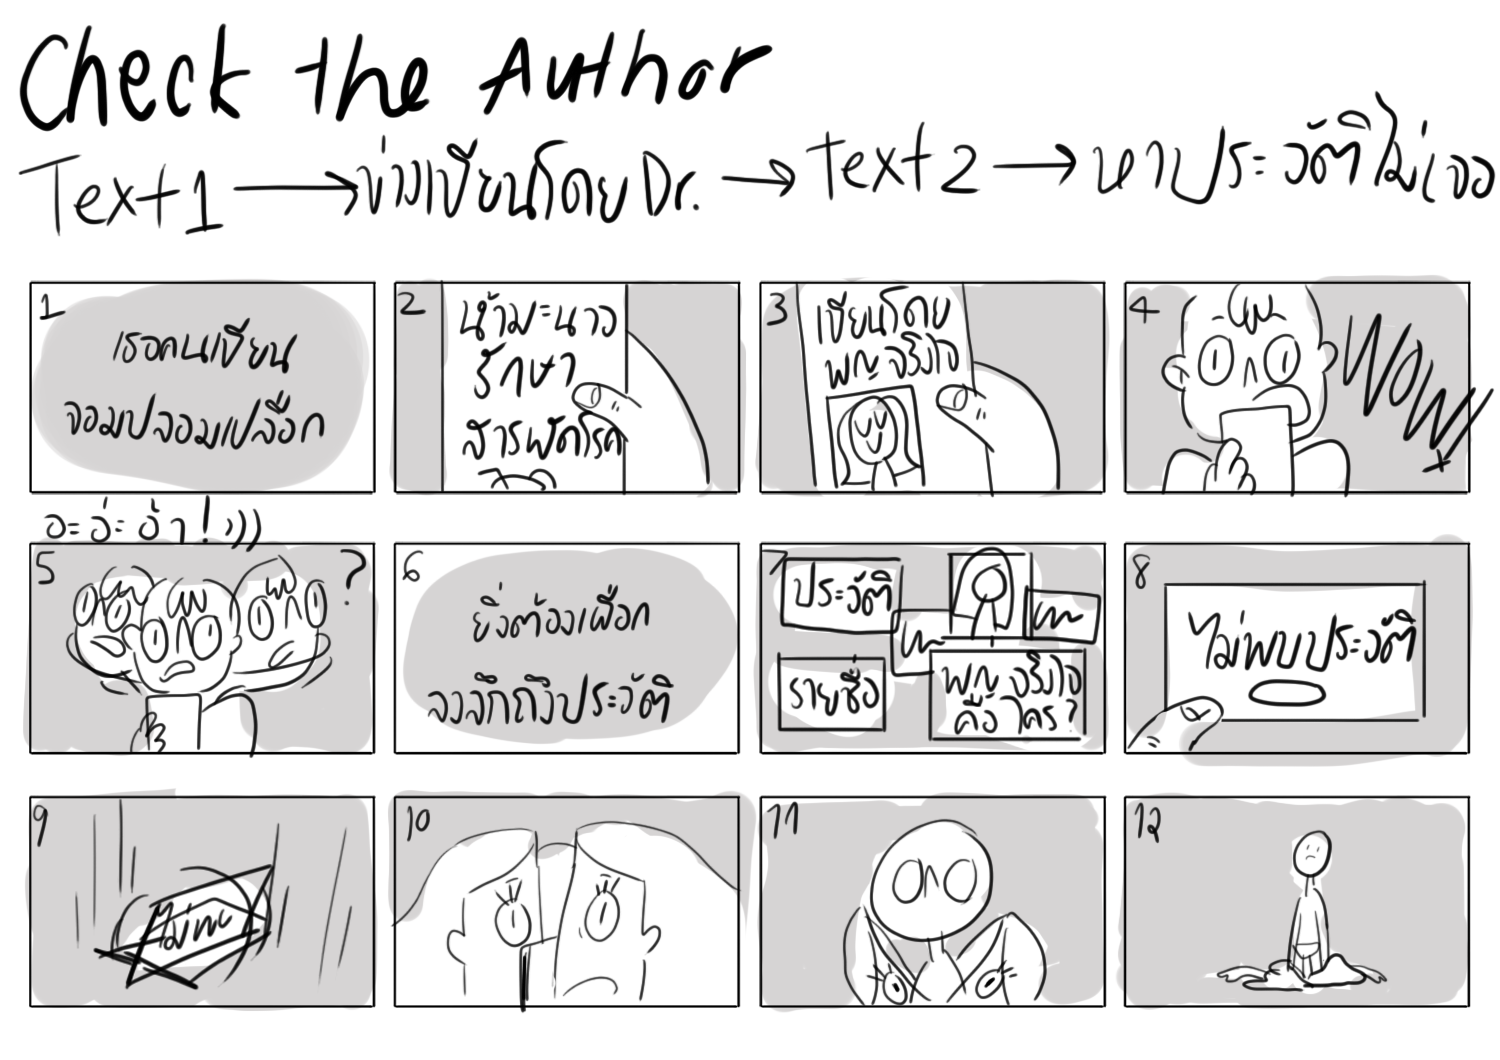 Storyboard for Check the Author